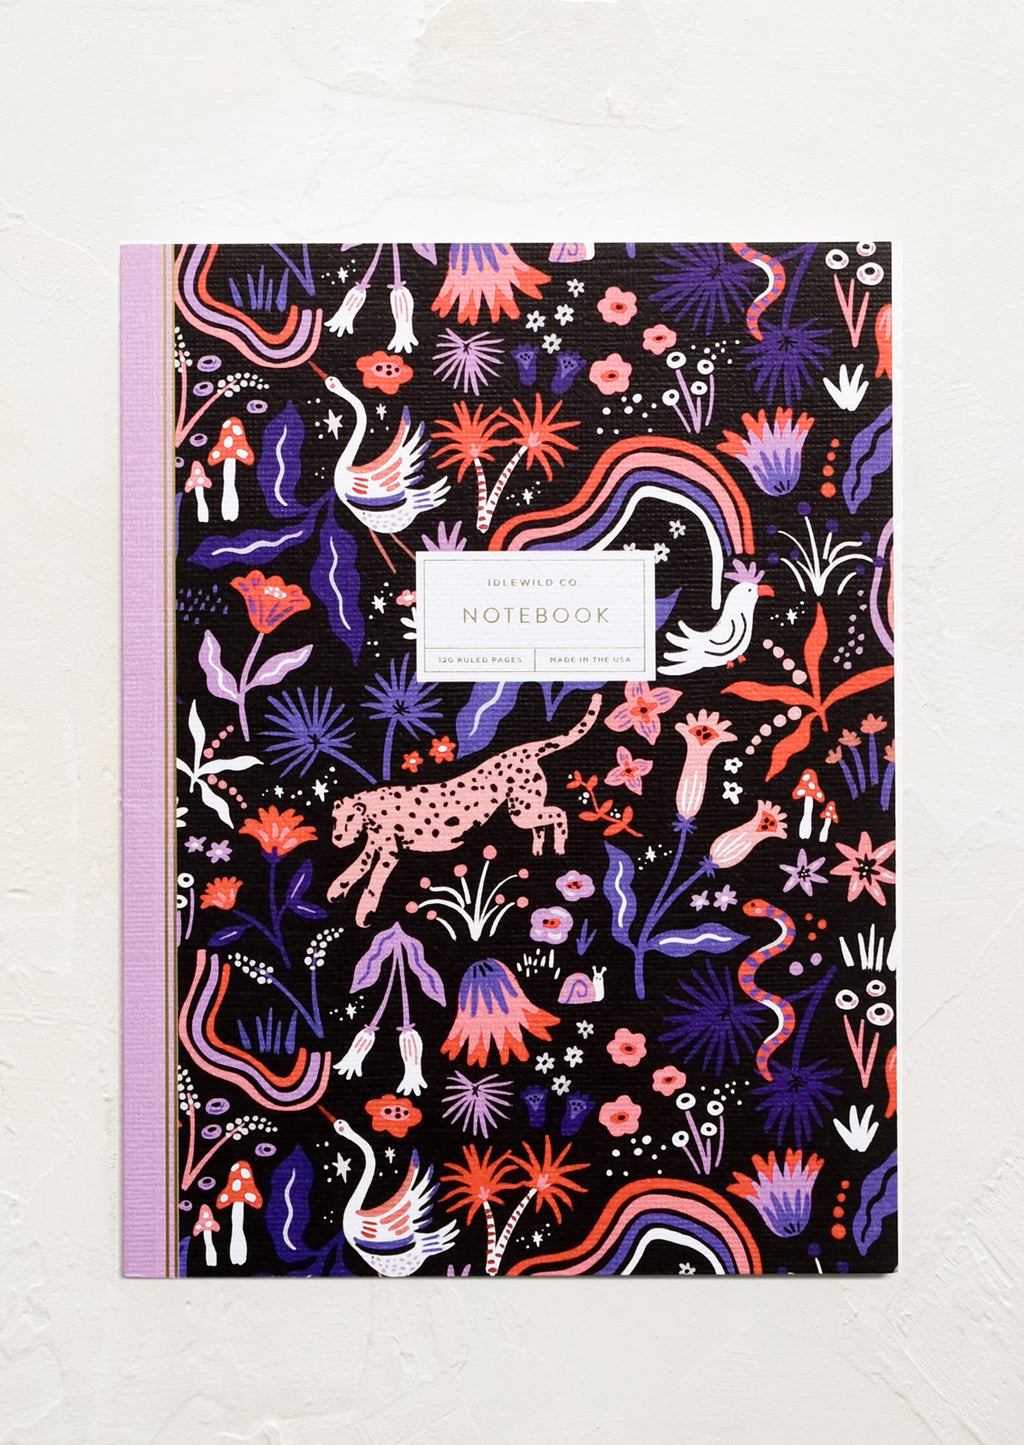 Midnight Menagerie: A midnight menagerie printed notebook.